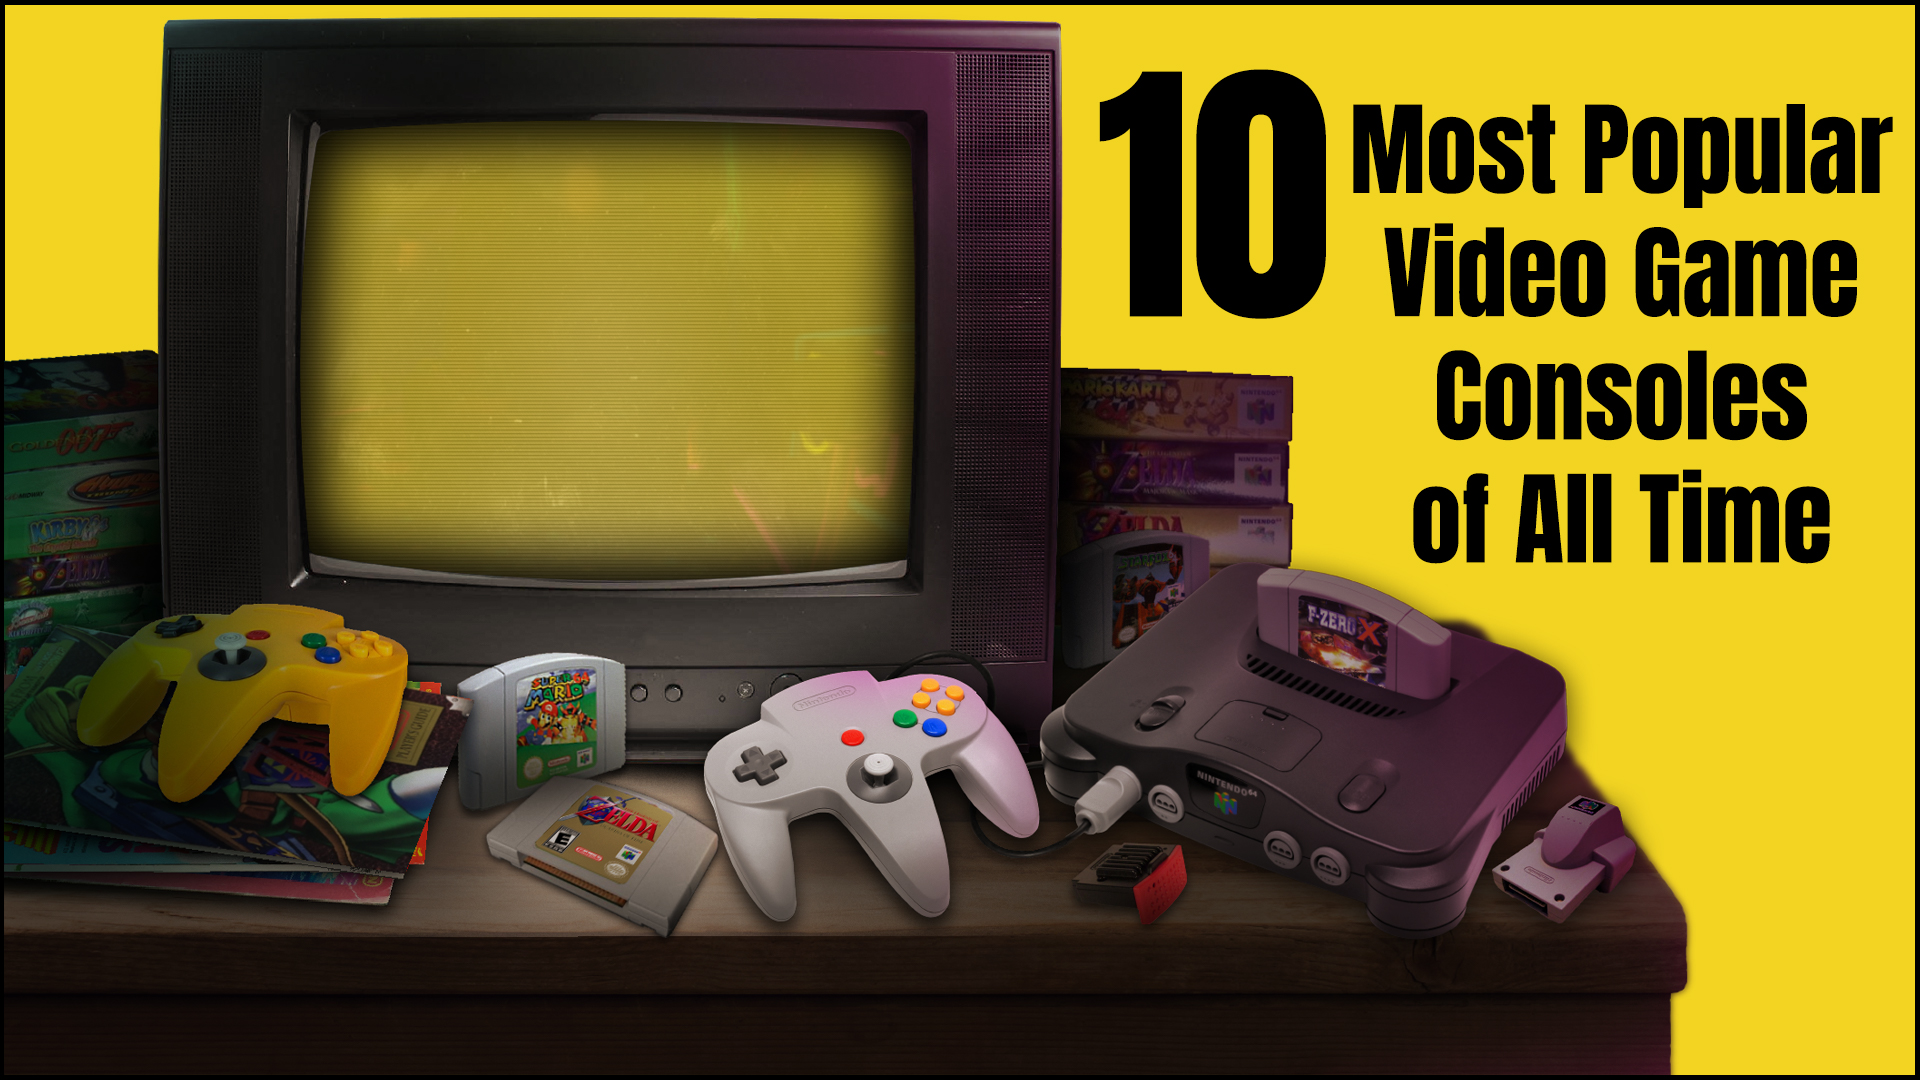 10 Most Popular Video Game Consoles of All Time